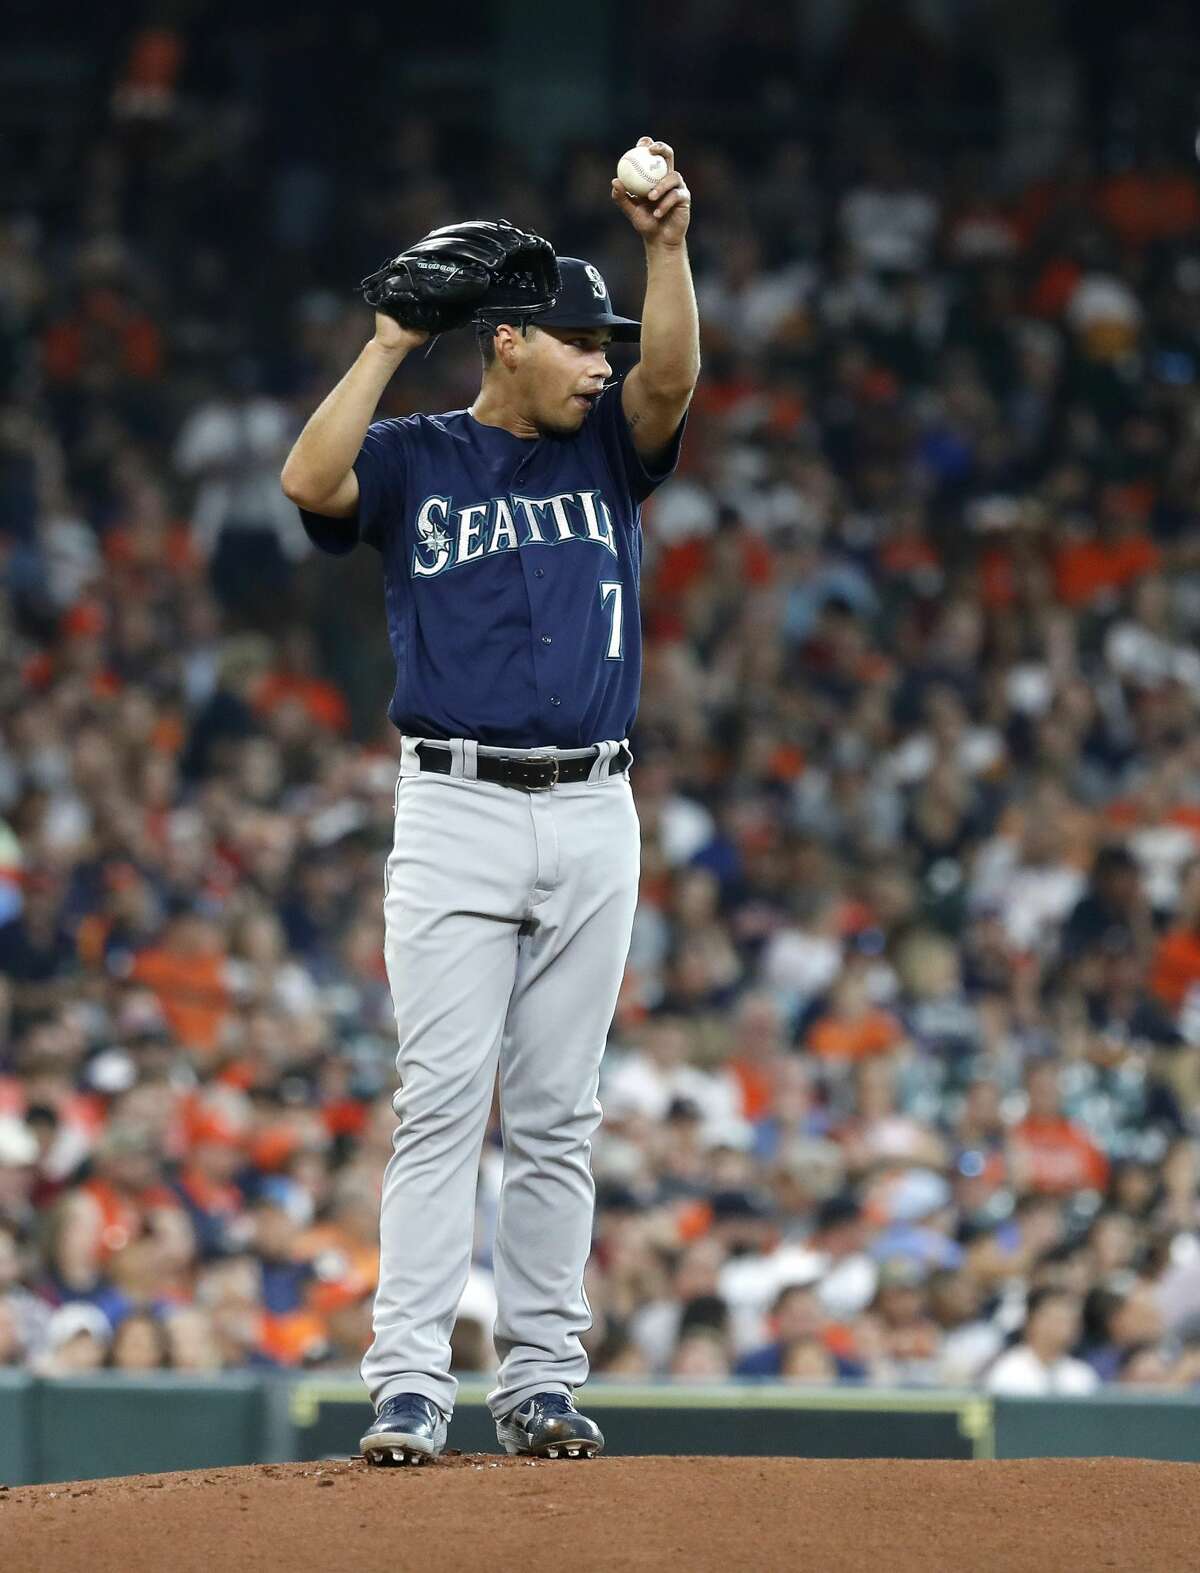 Mariners Sign Marco Gonzales To 4-Year Contract Extension, by Mariners PR